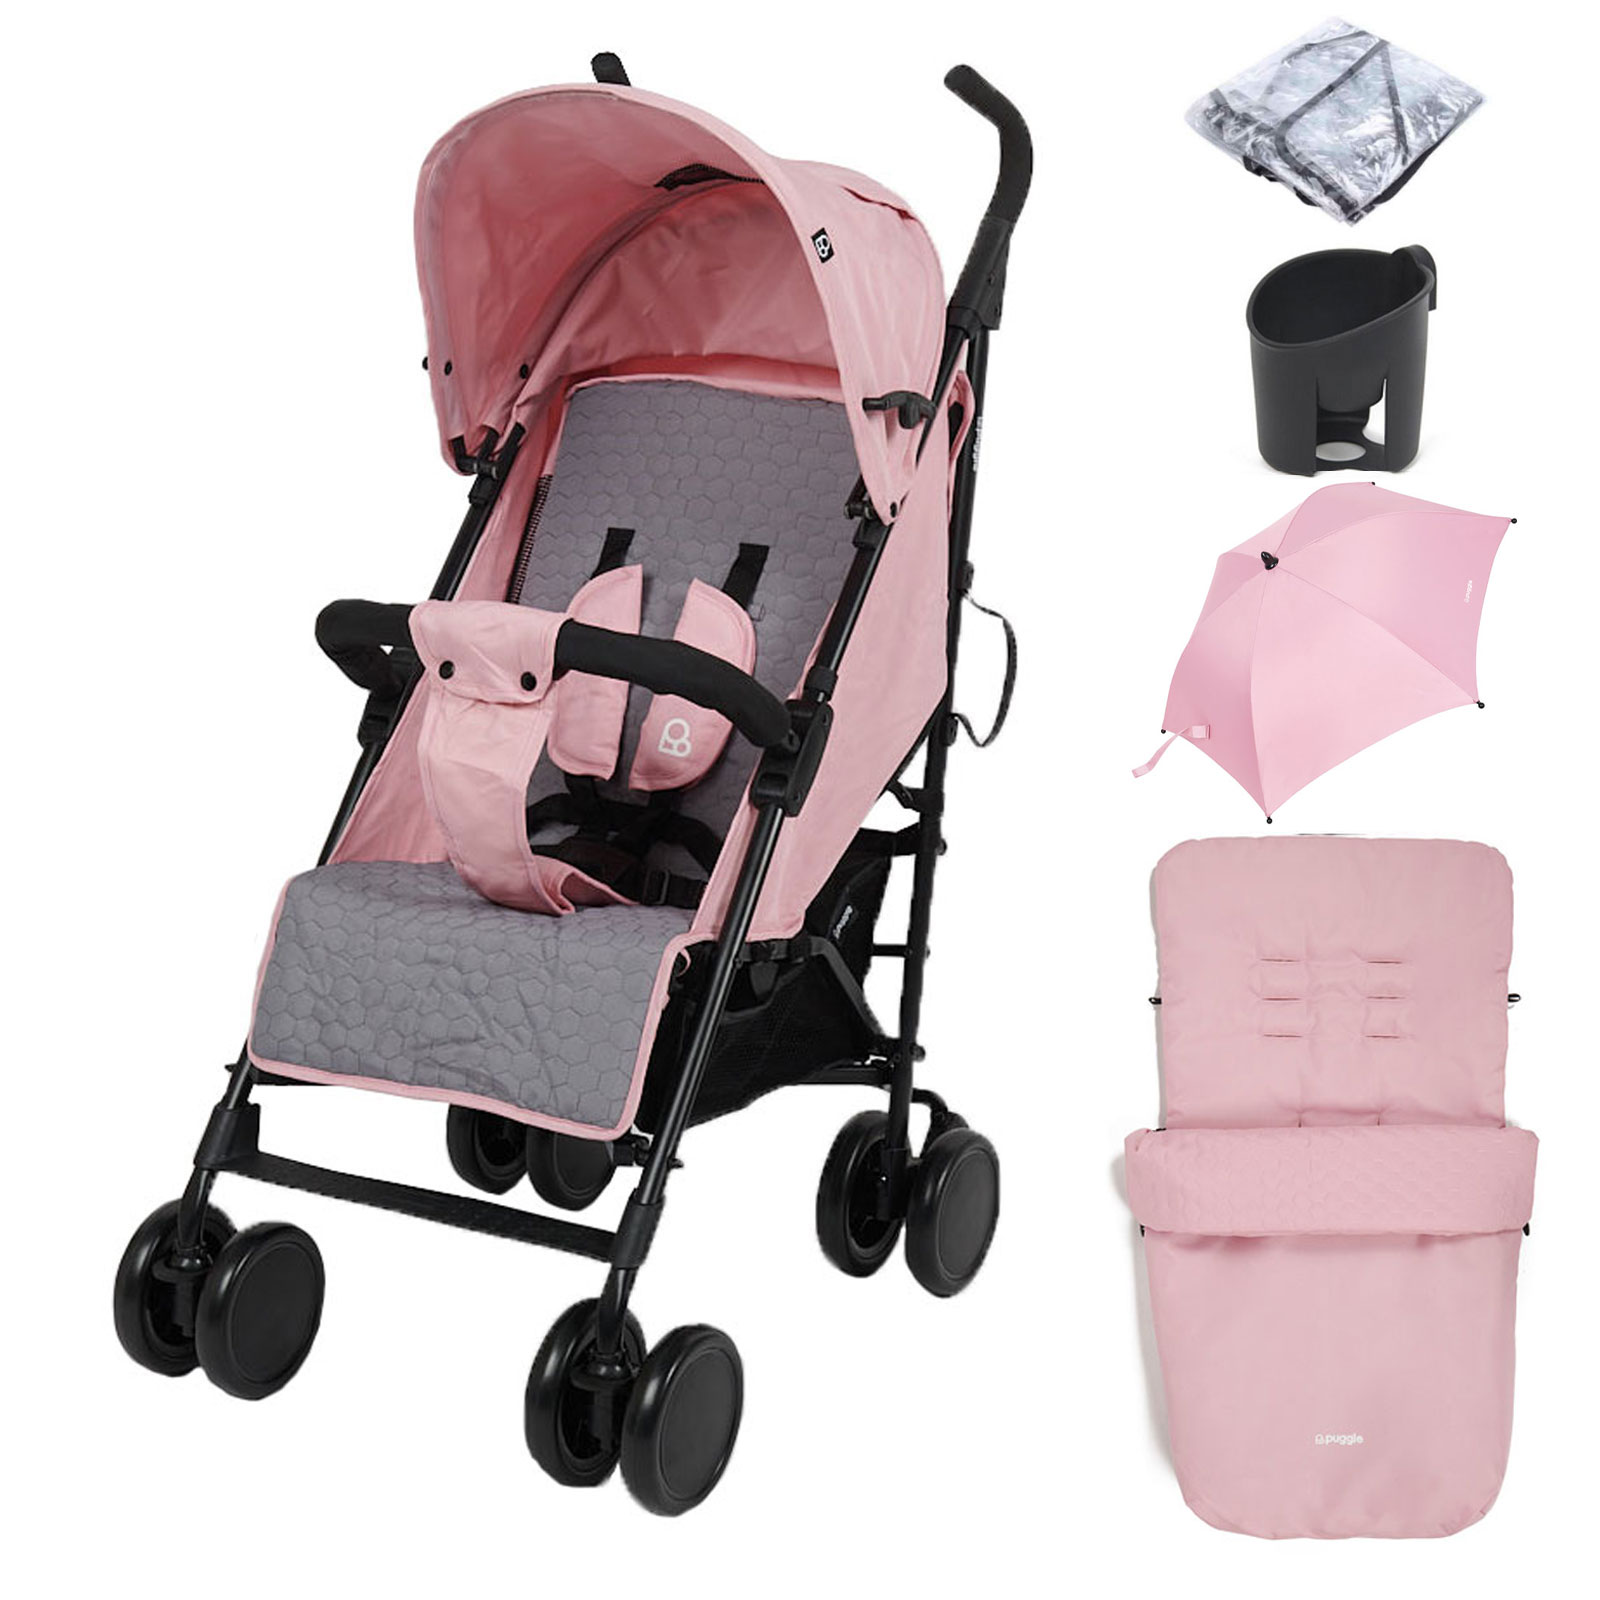 Puggle Litemax Pushchair Stroller with Raincover, Cupholder, Universal Footmuff and Parasol - Vintage Pink